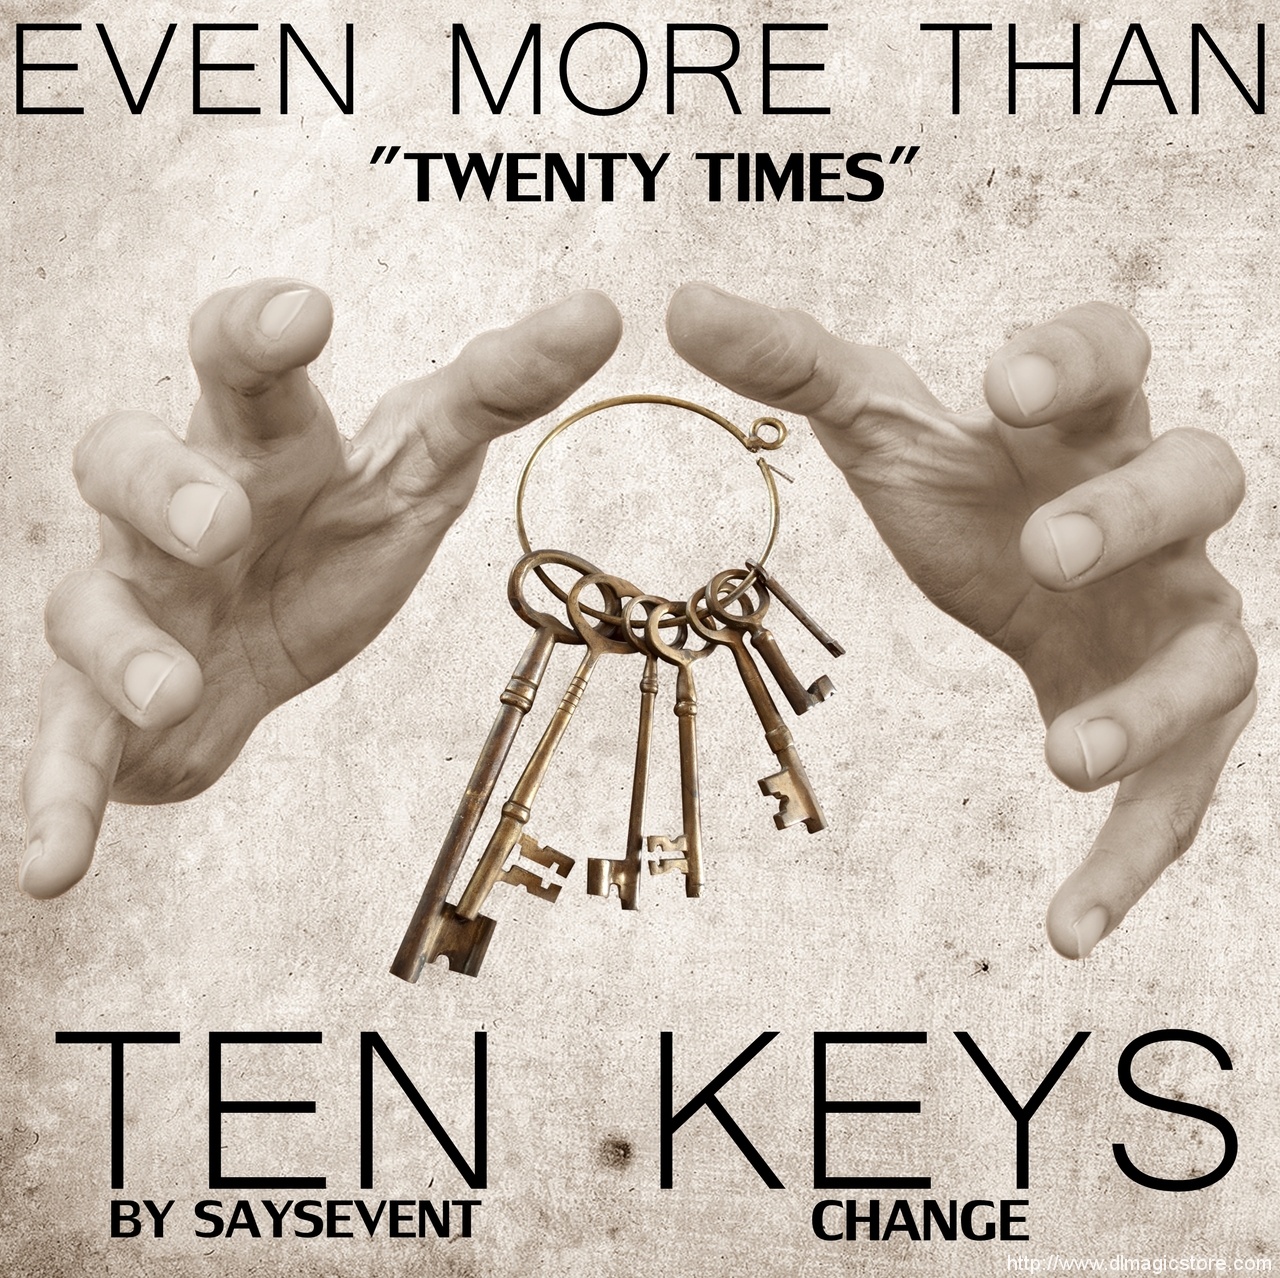 TEN KEYS CHANGE by SaysevenT (Instant Download)